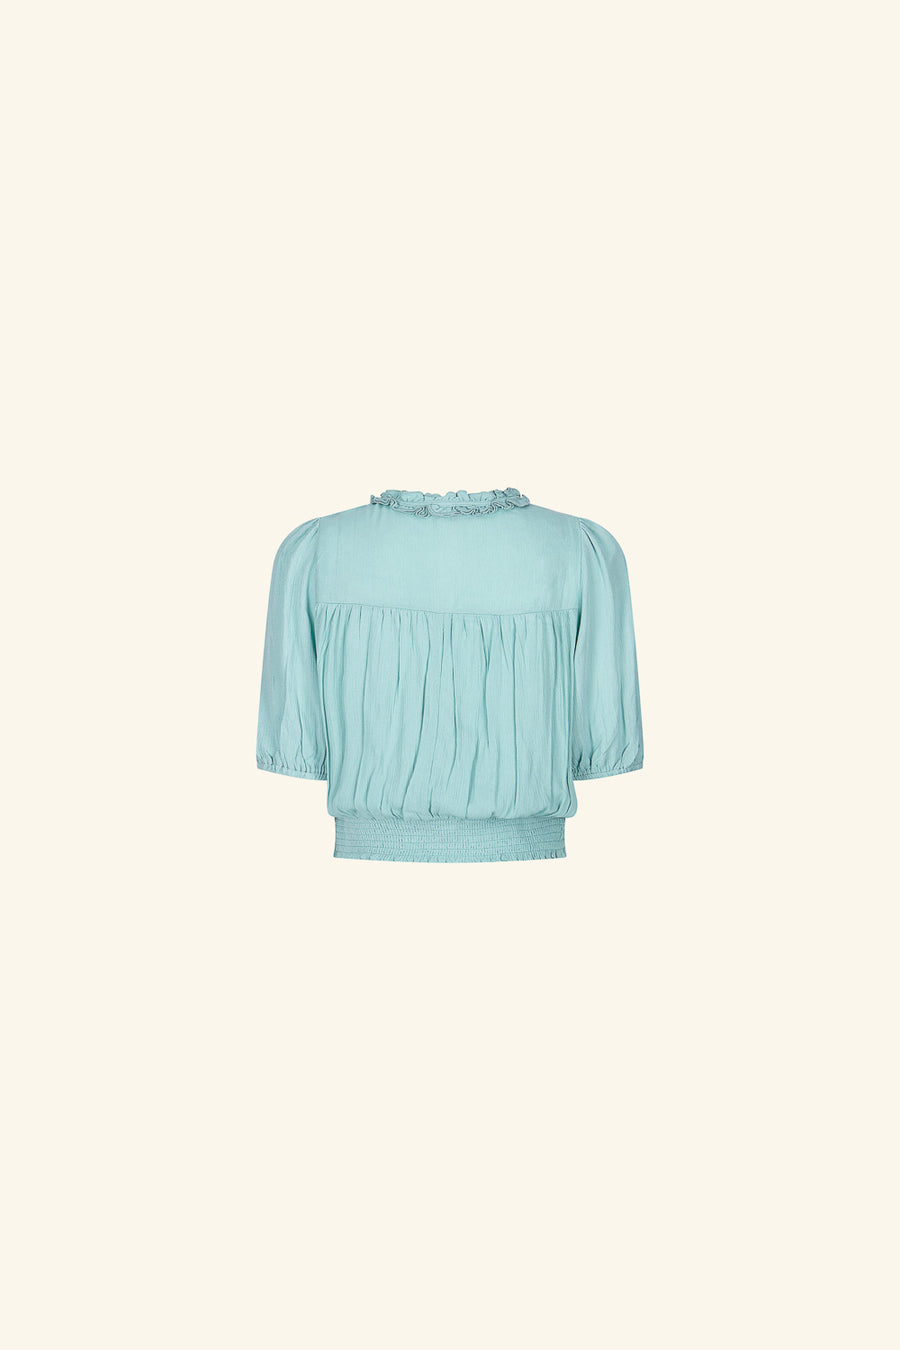 Sage Embroidered Top - Trixxi Clothing